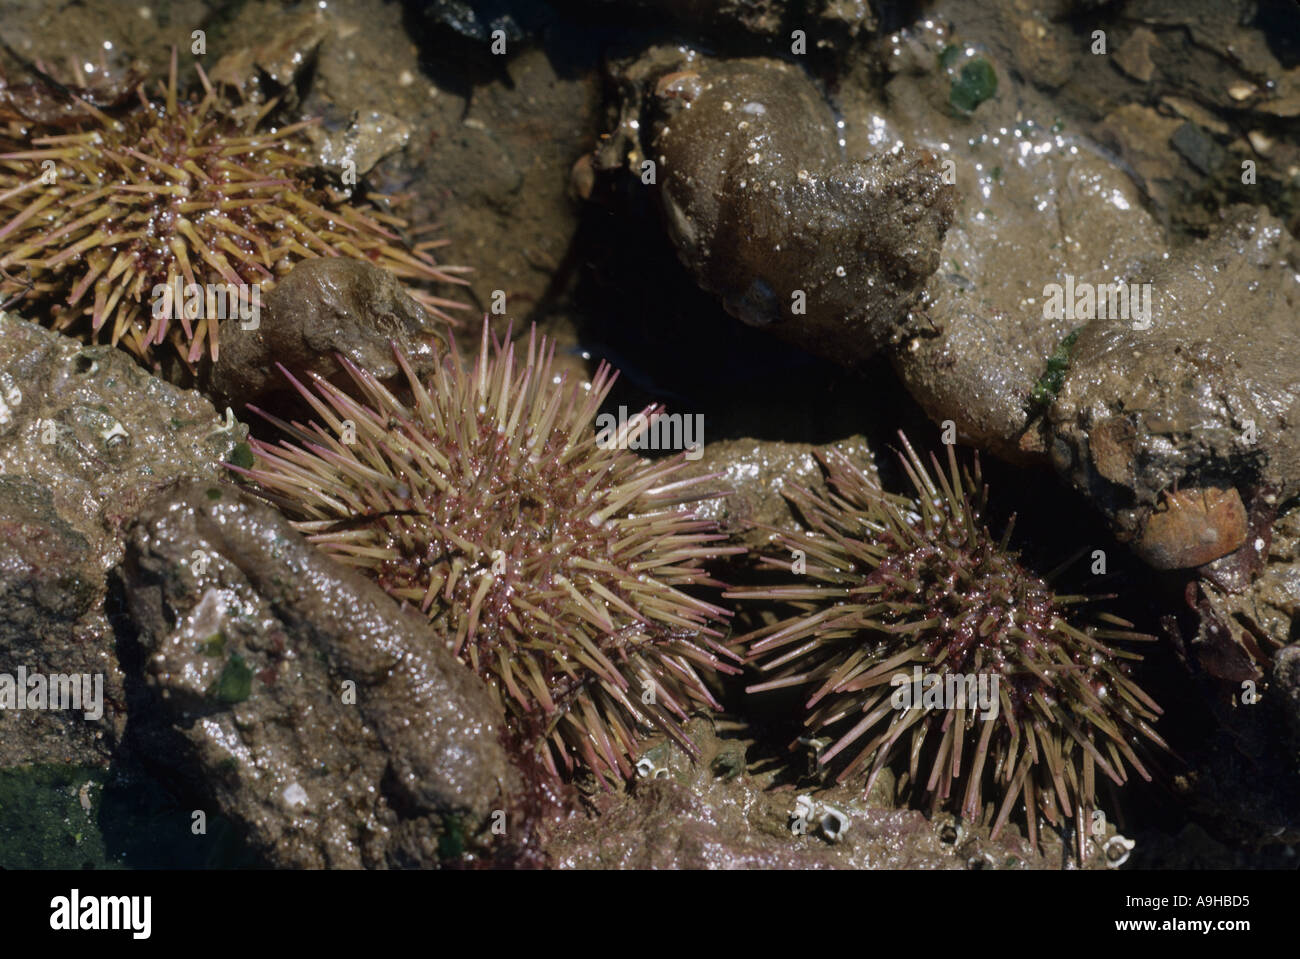 Urchin Purple Tipped Sea Urchin Psammechinus miliaris Exposed on shore at low tide Stock Photo